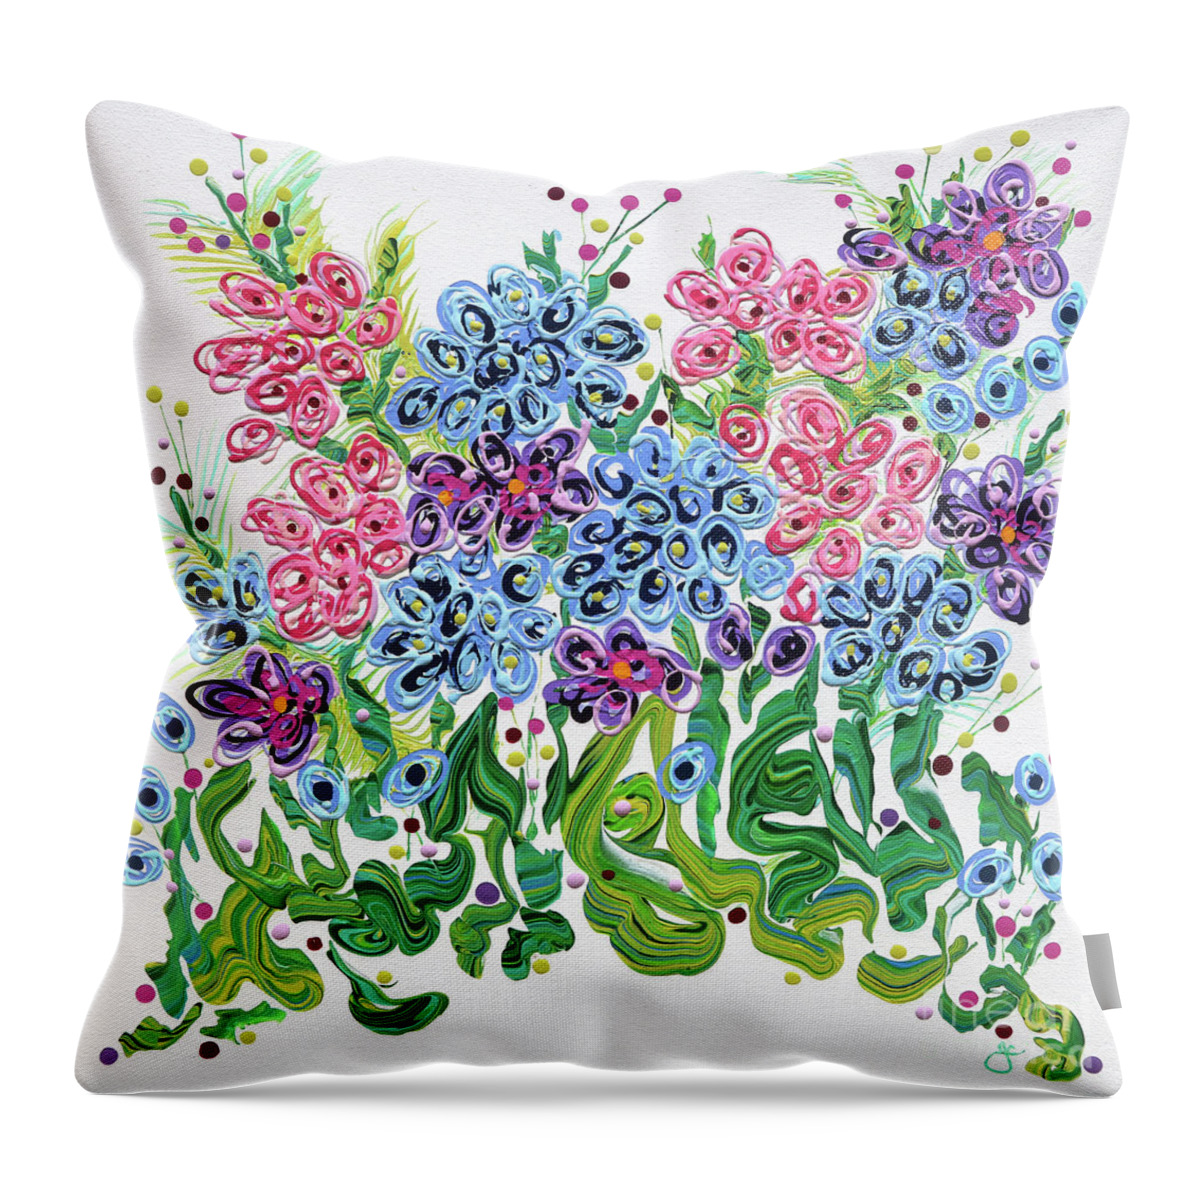 Fluid Acrylic Flower Painting Throw Pillow featuring the painting Parkers' Flowers by Jane Crabtree